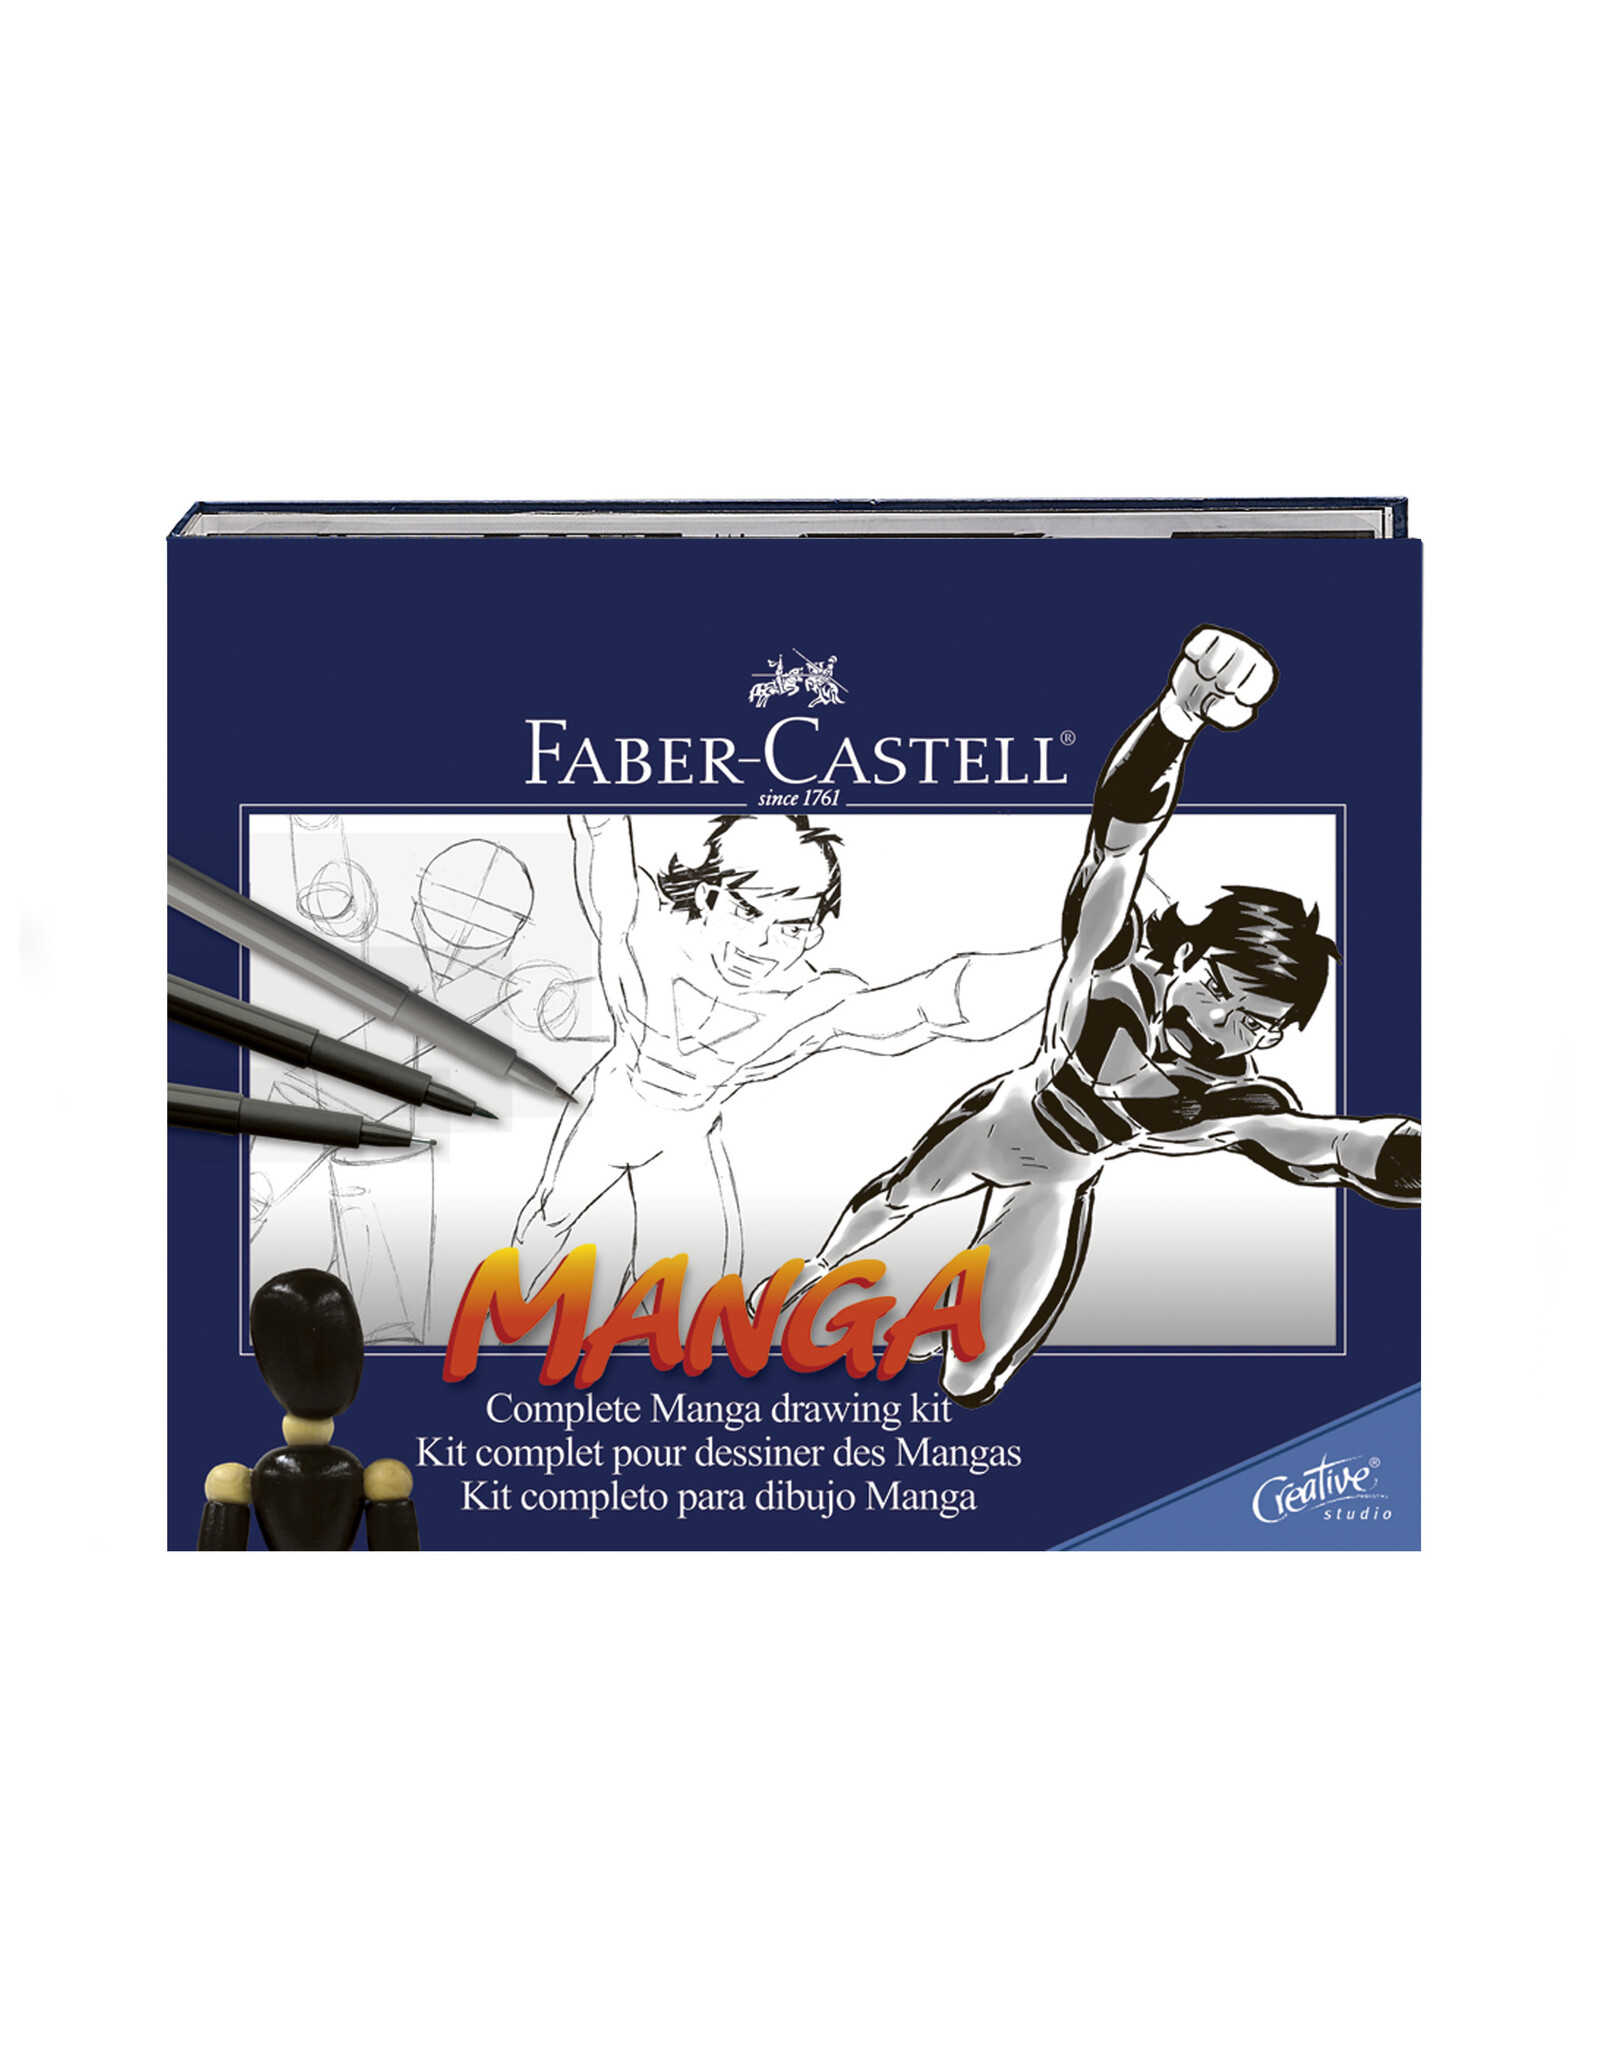 Faber-castell Getting Started Manga Comic Kit - The Art Store